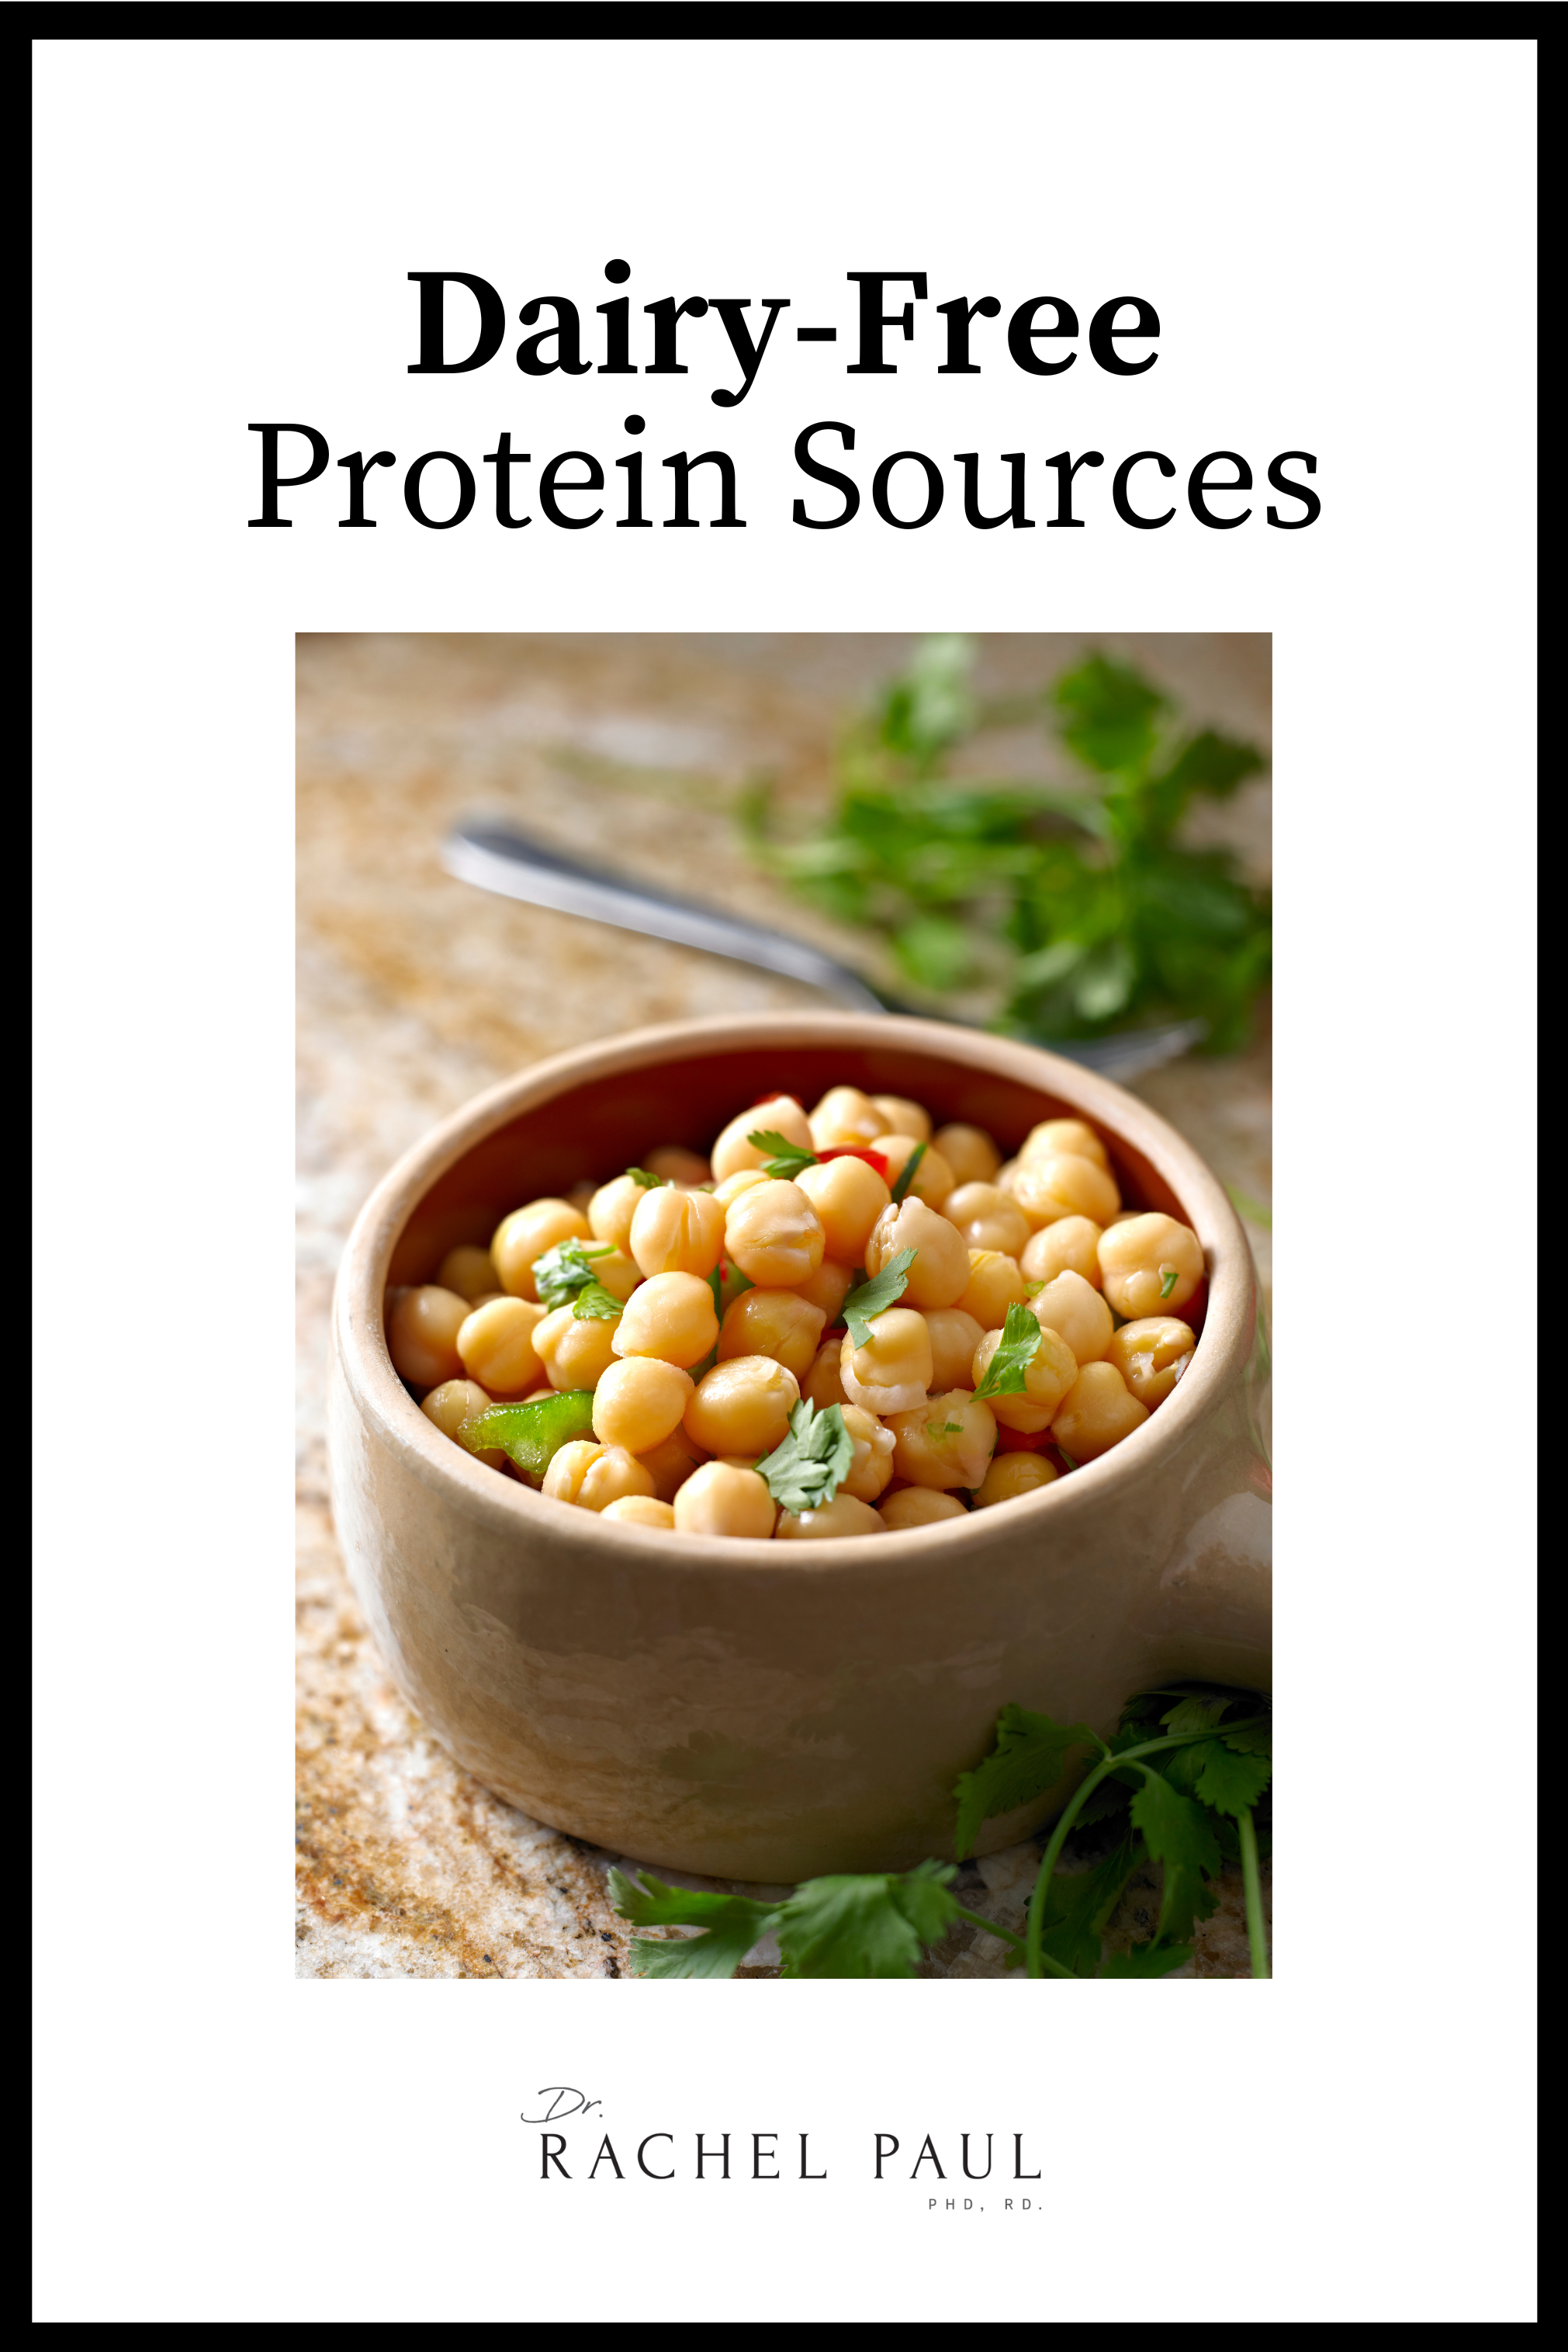 Dairy-Free Protein Sources